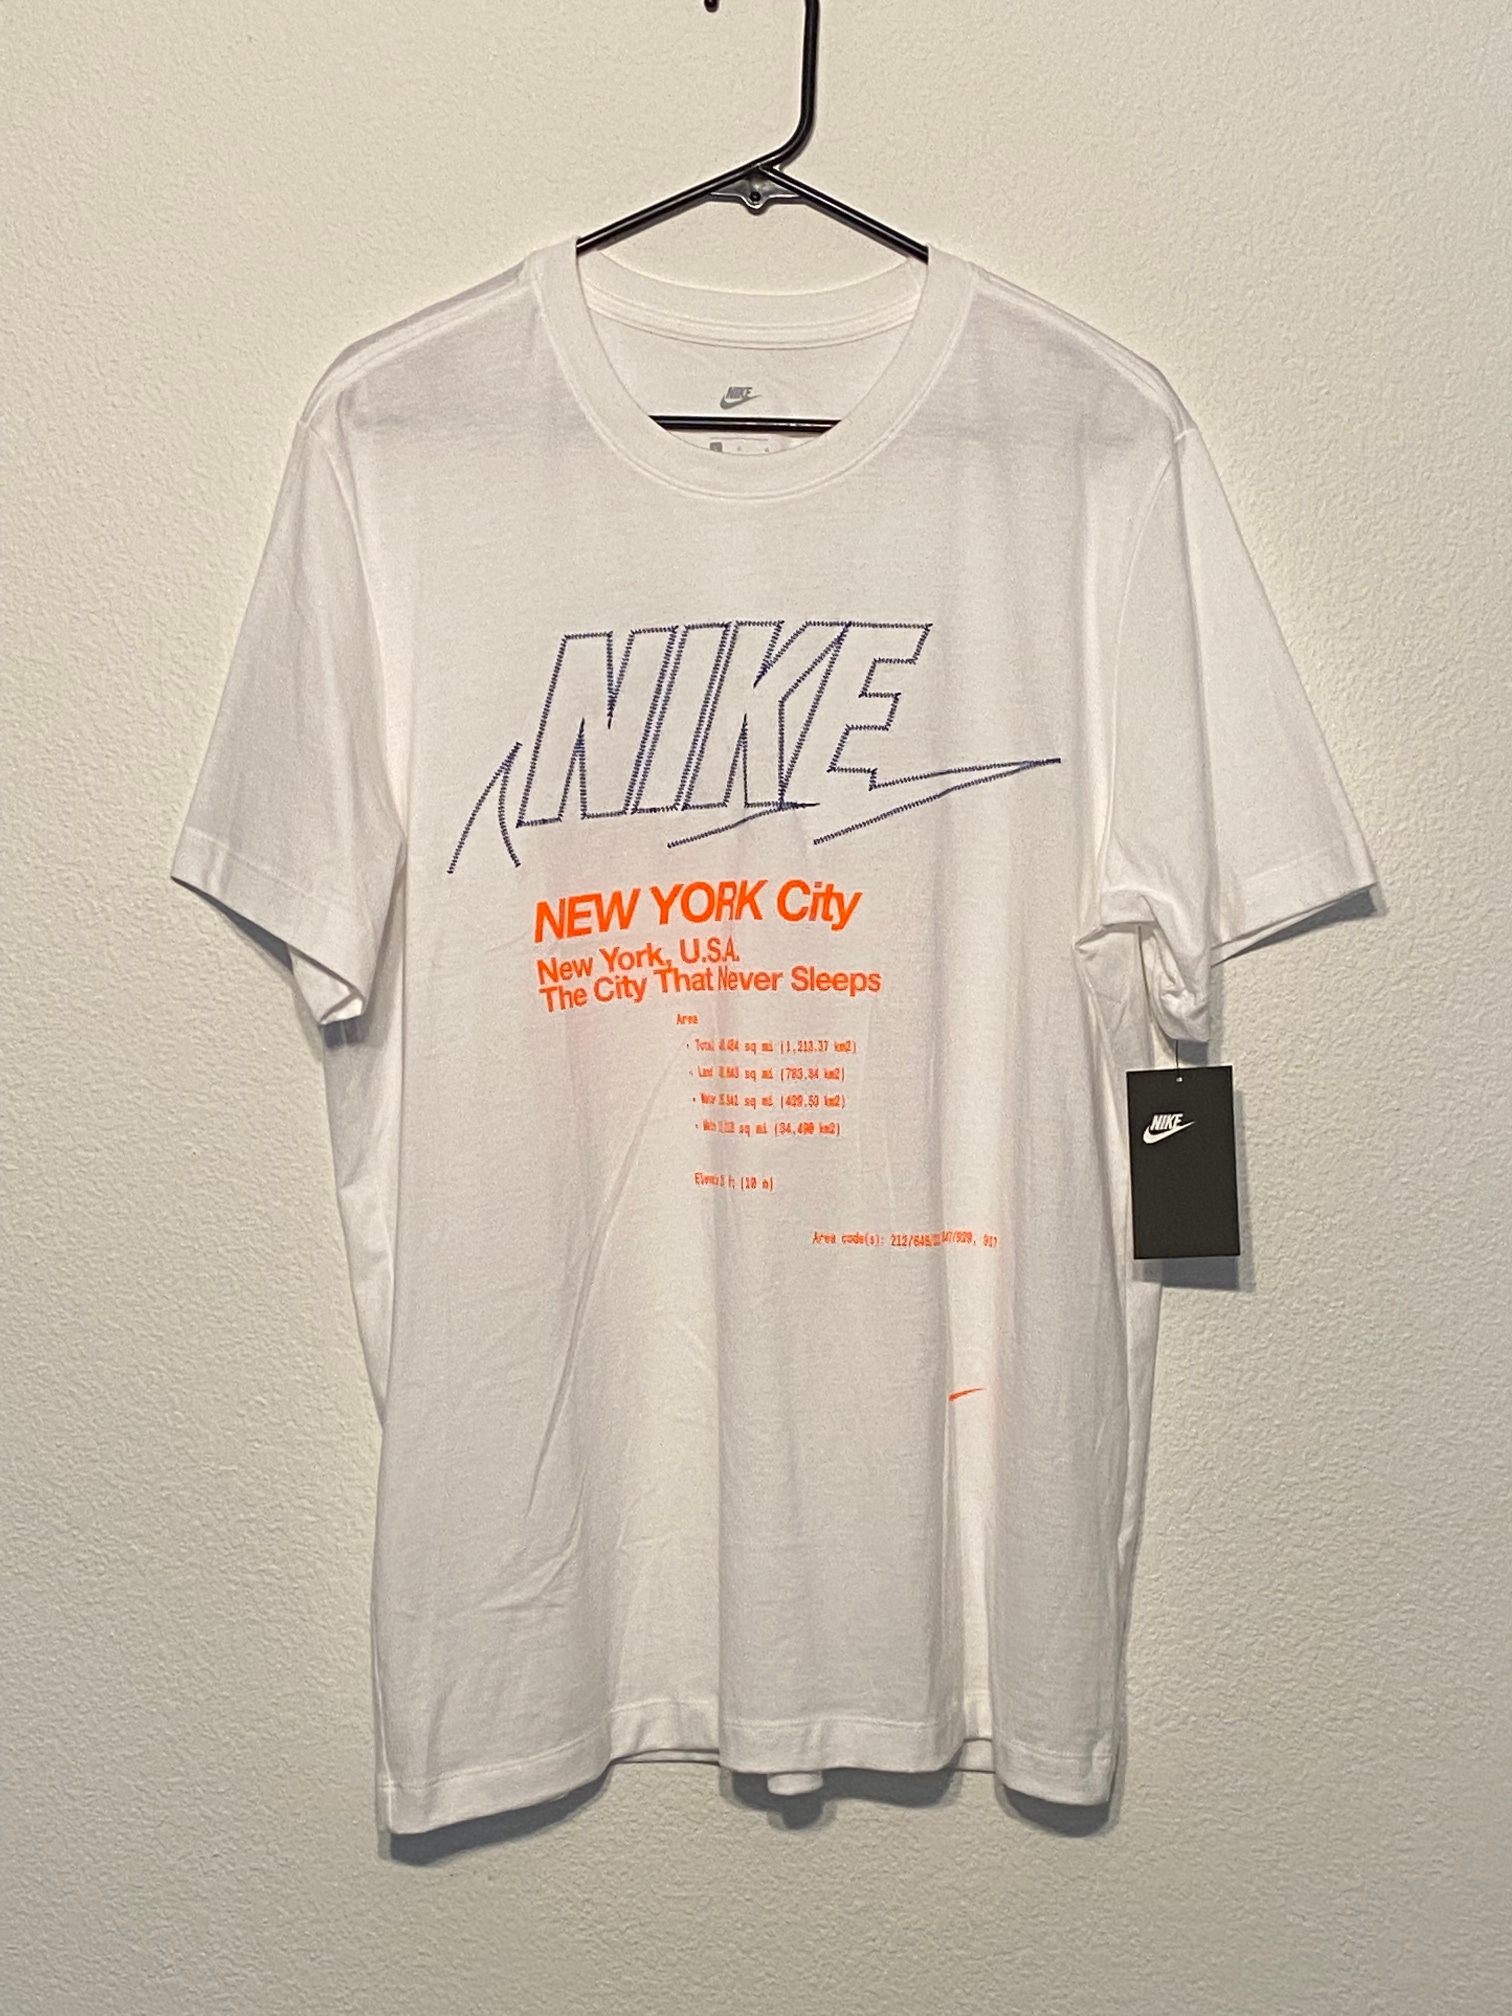 NIKE Sportswear NYC "The City That Never Sleeps" Men's Size L White T Shirt New